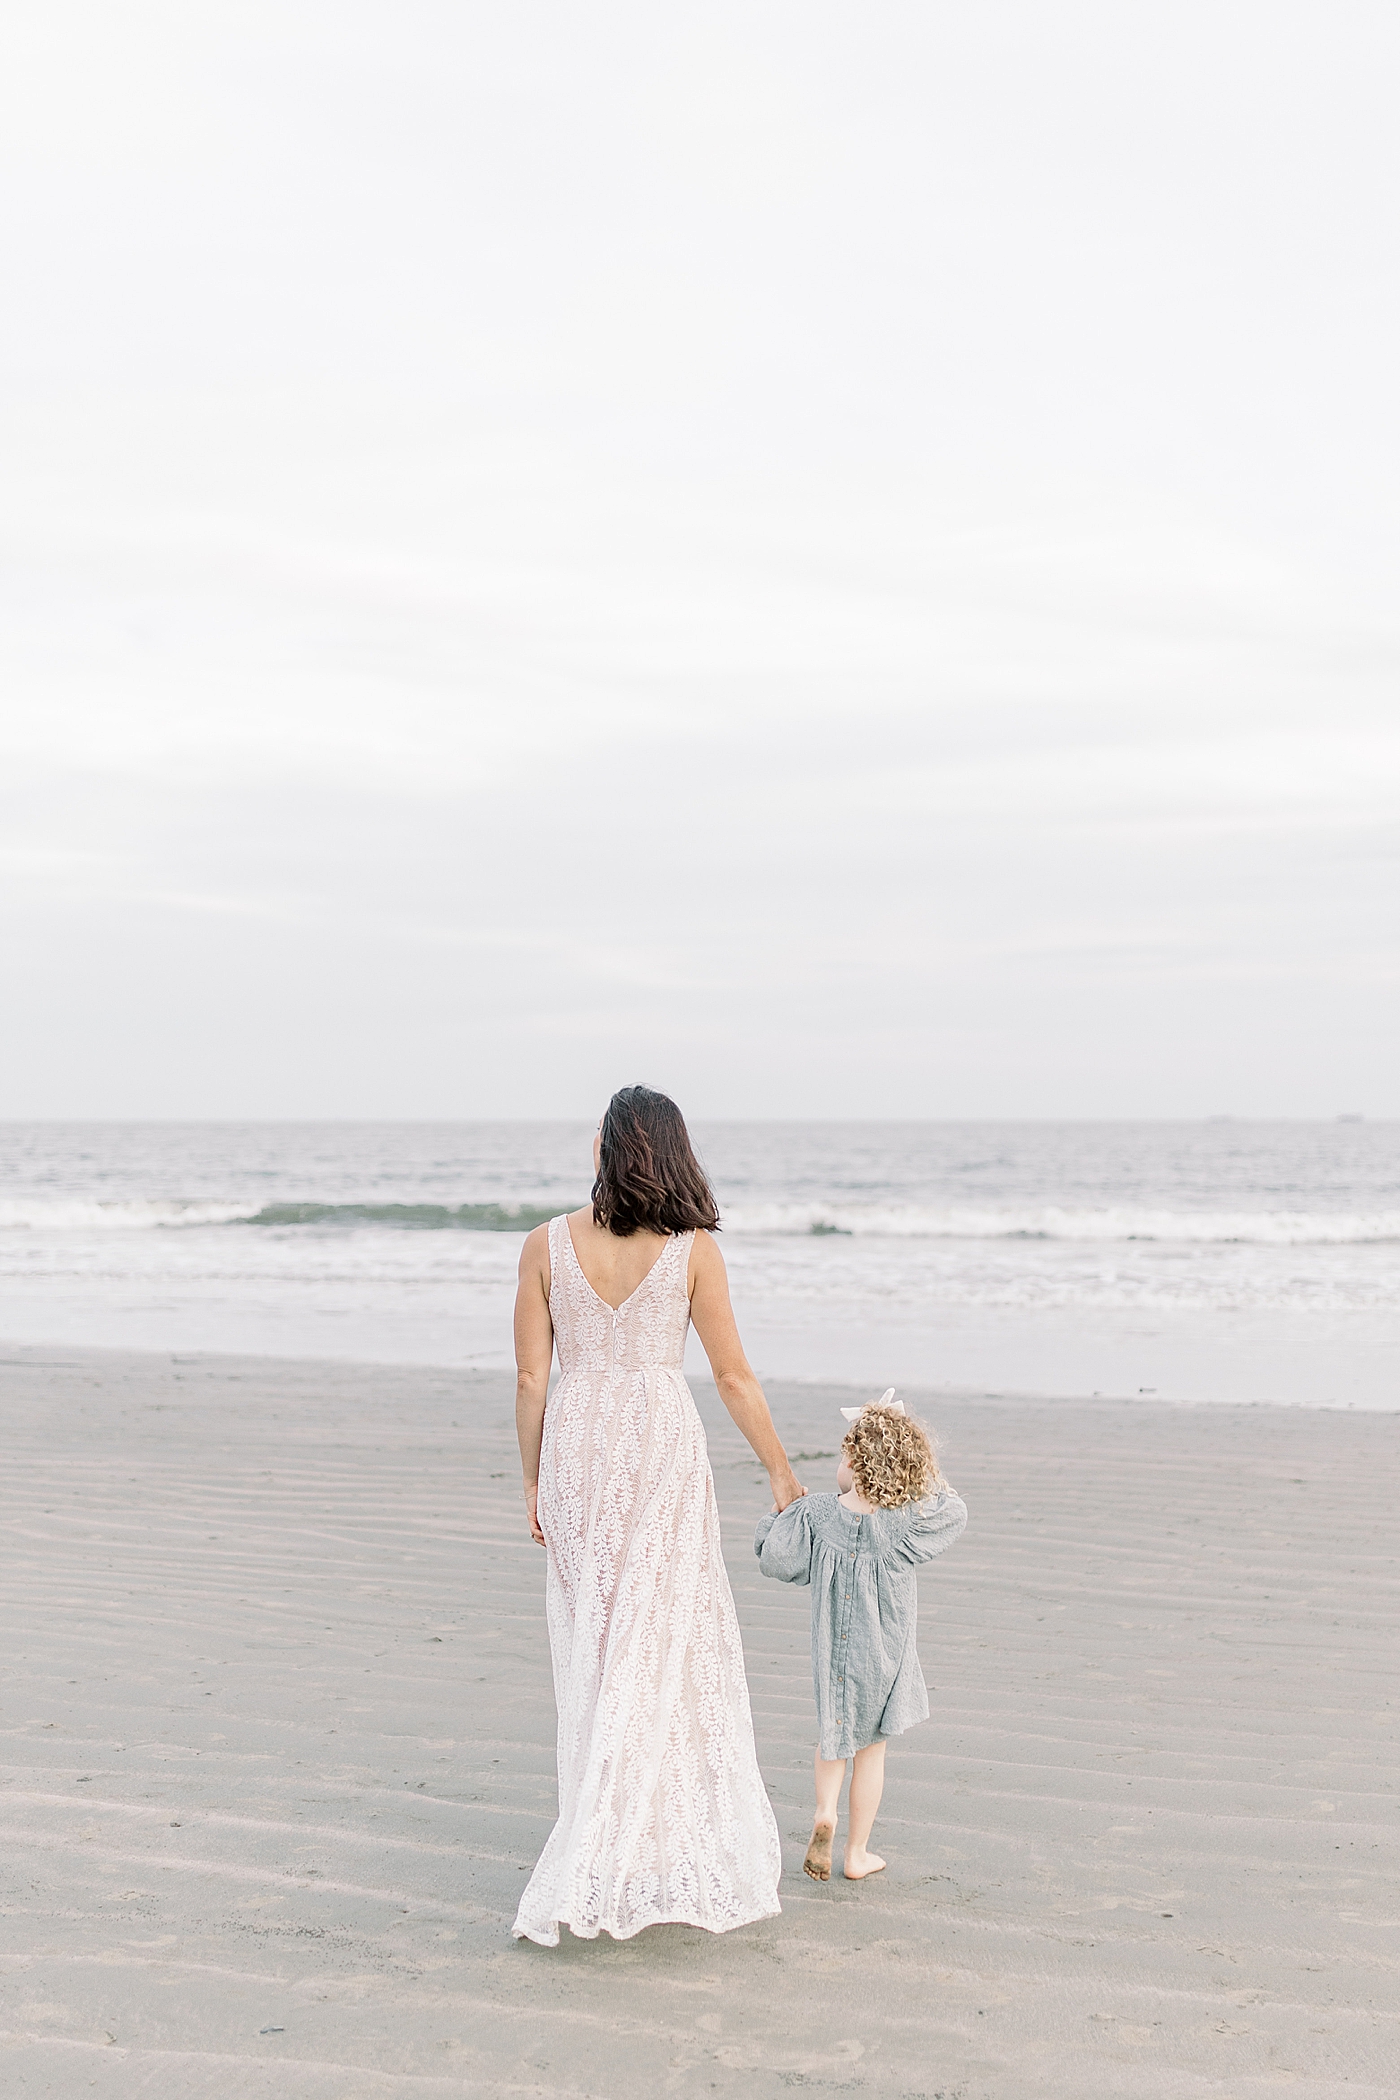 Mom holding her little girl's hand as they walk toward the beach | Photo by Caitlyn Motycka Photography